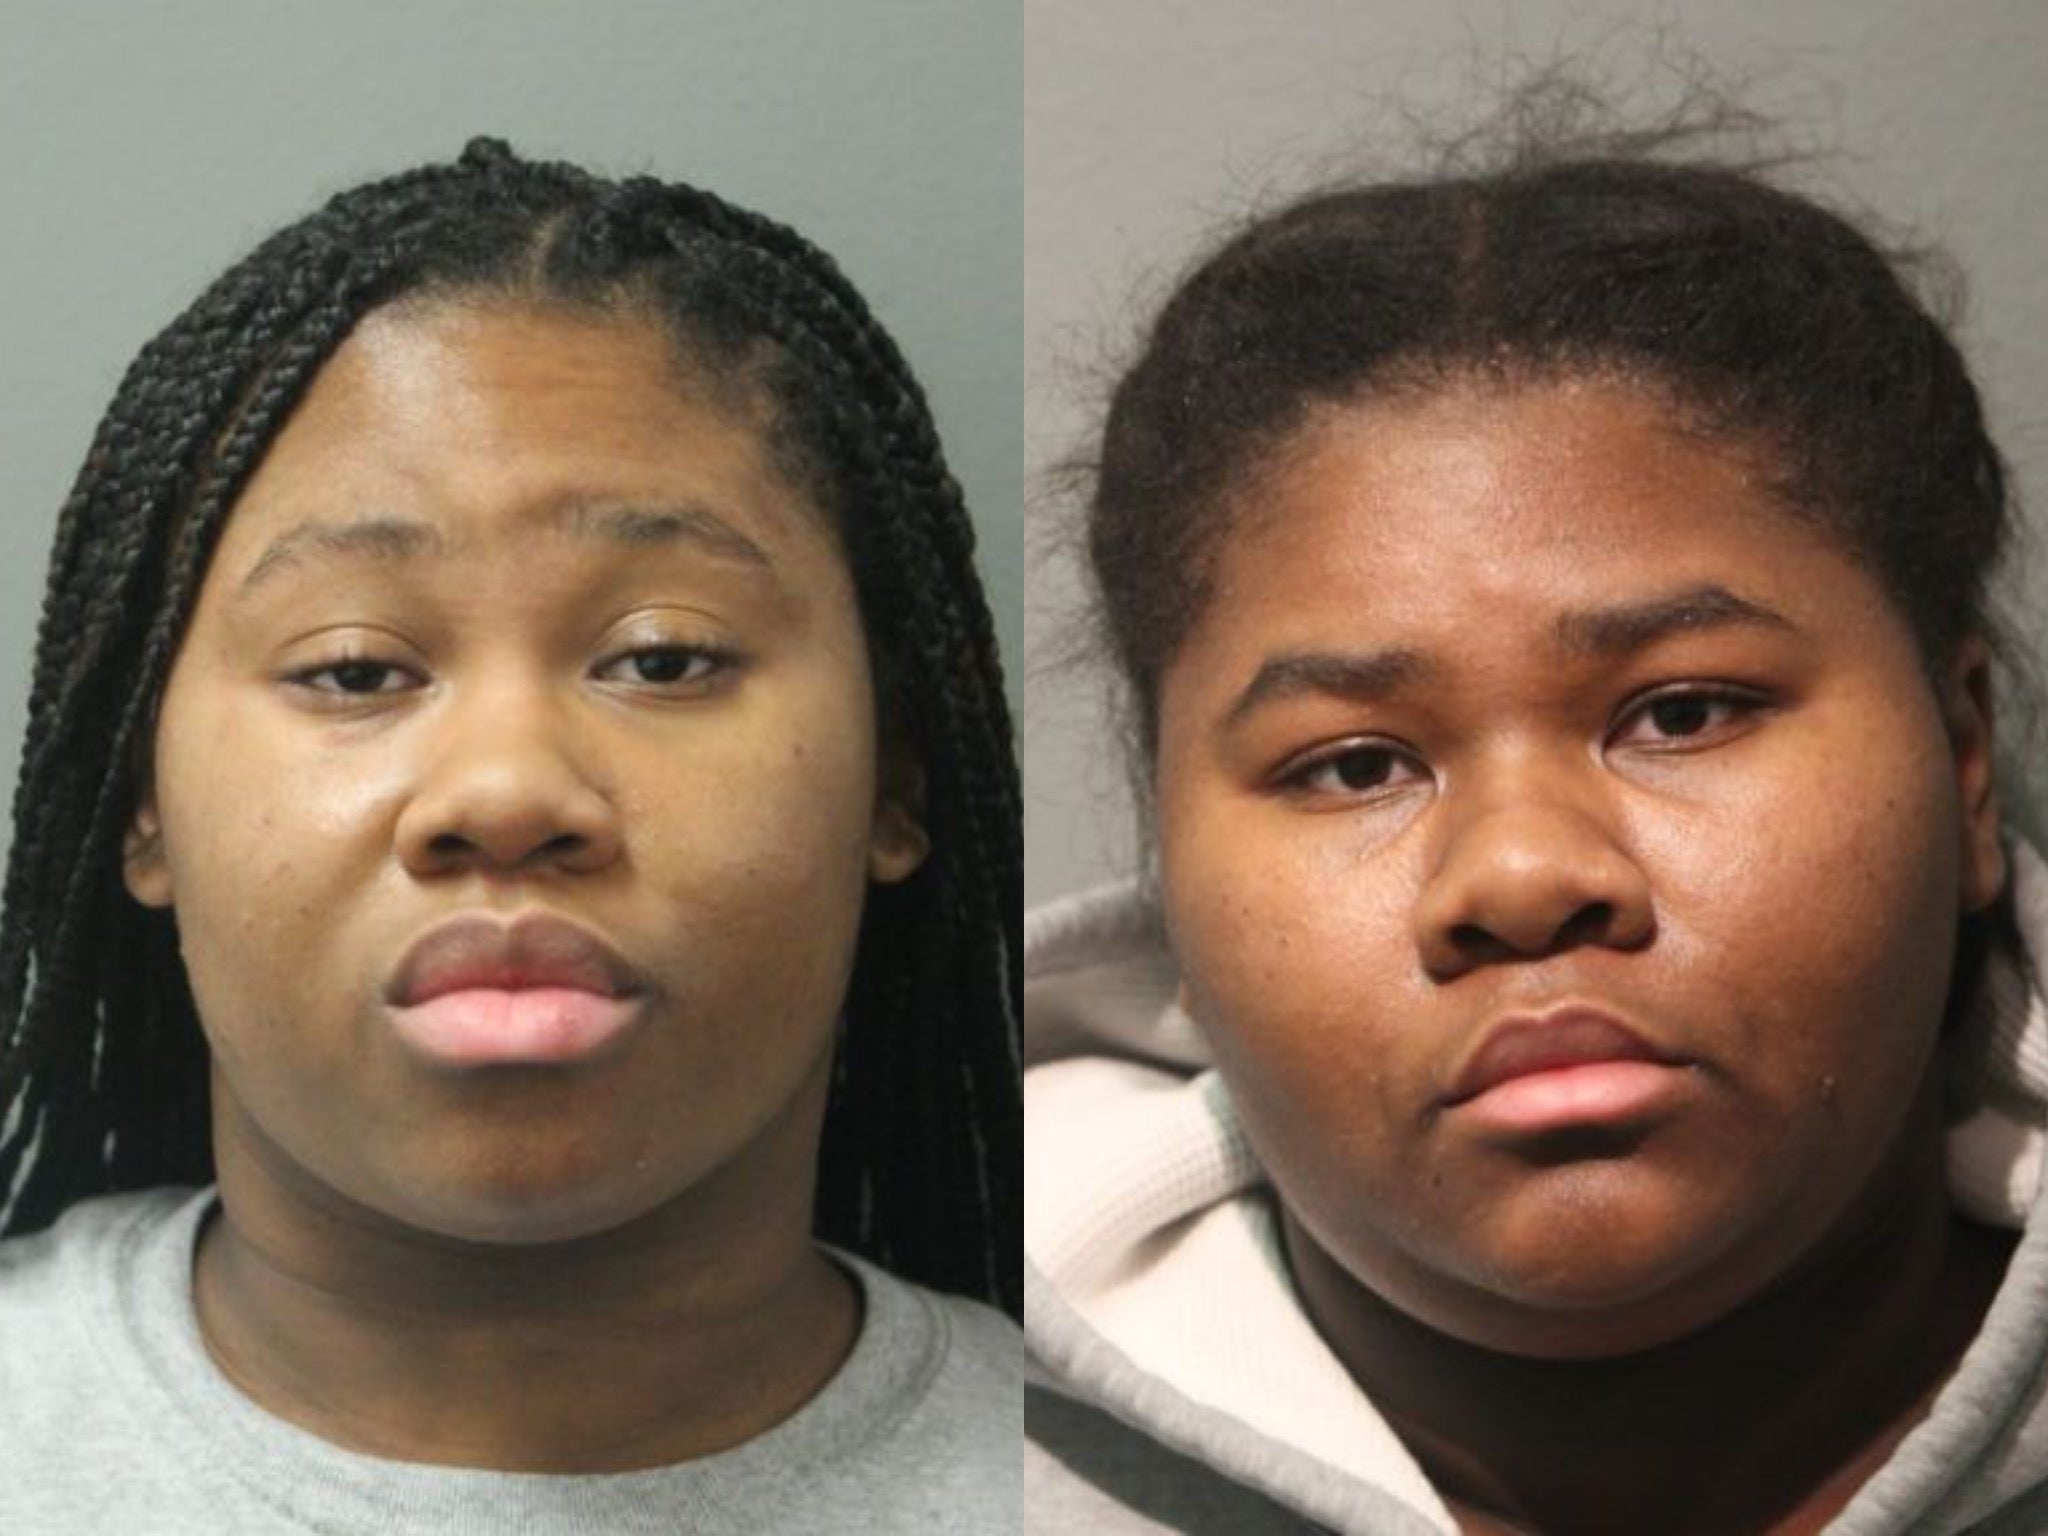 Jayla (L) and Jessica (R) Hill both face counts of attempted murder after a store security guard was stabbed for asking them to wear face masks